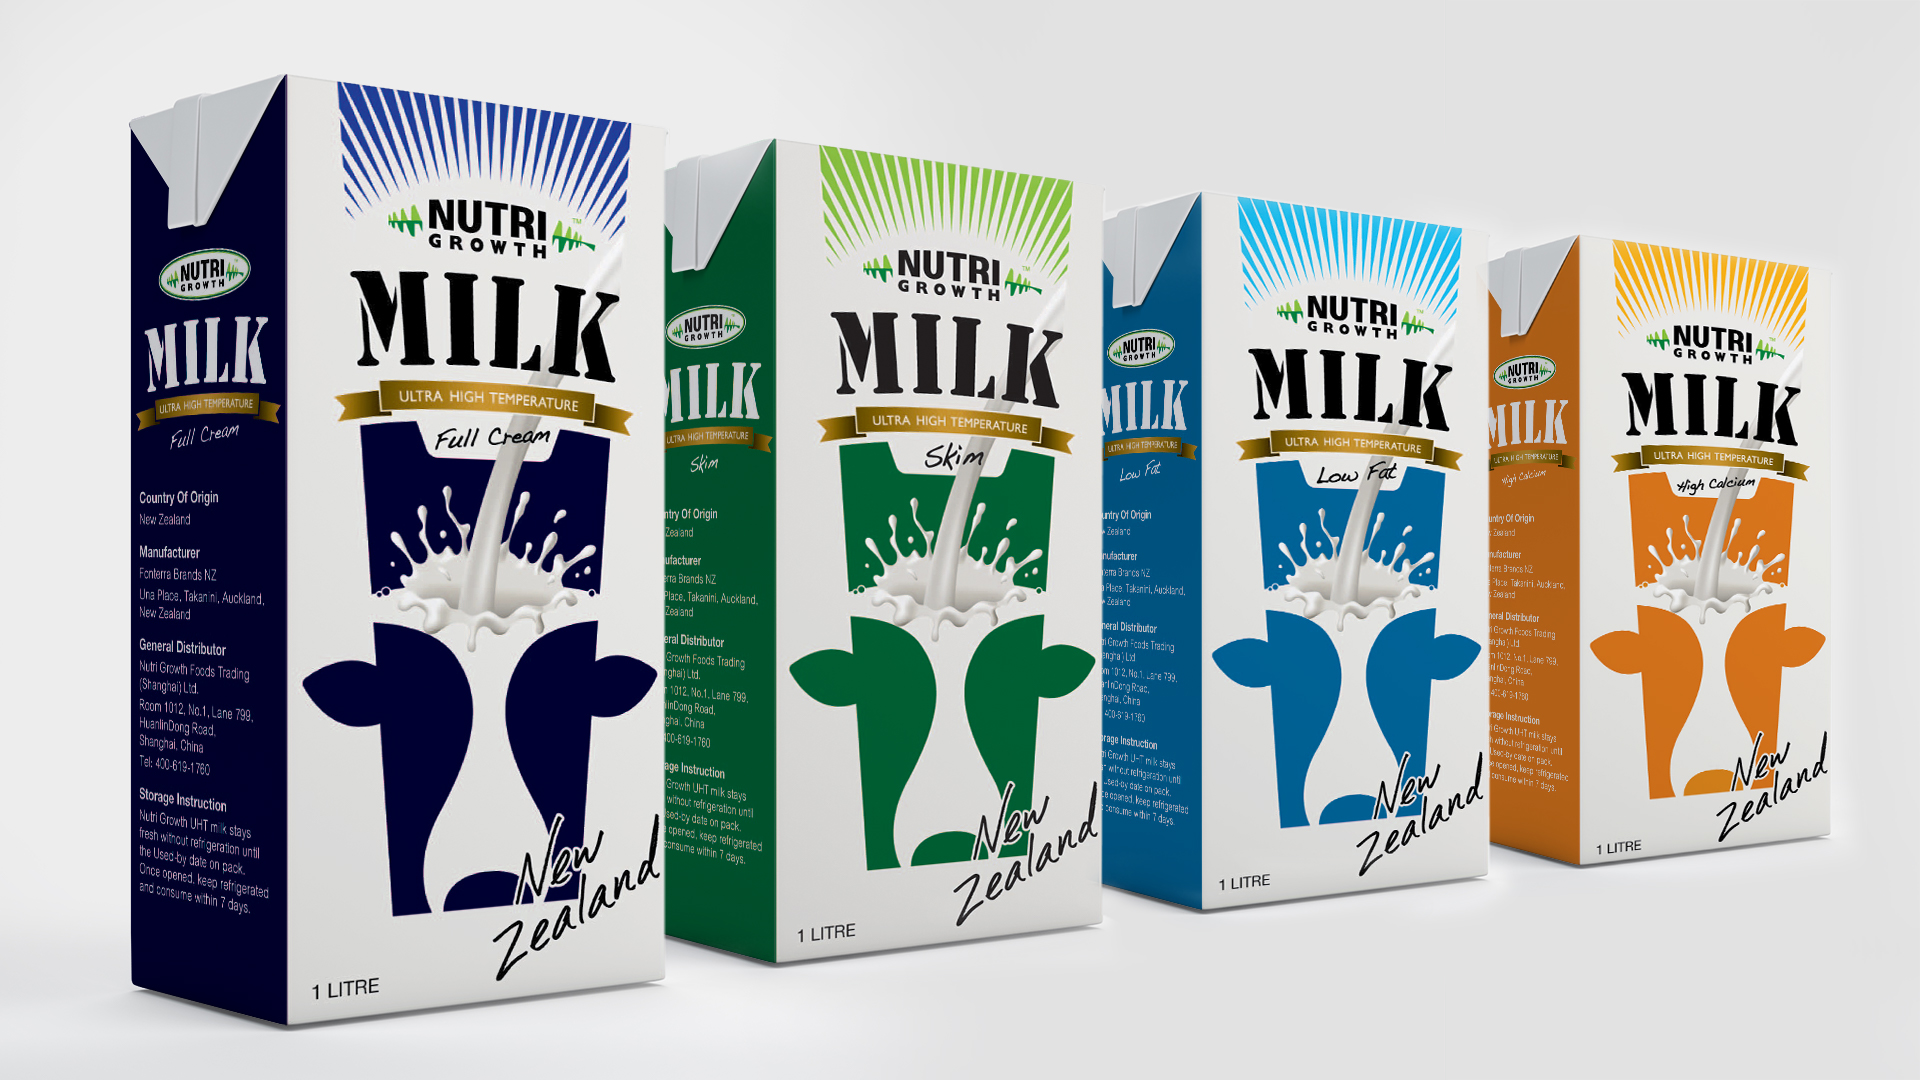 New Logo, New Packaging Design and New Look for Nutri Growth!